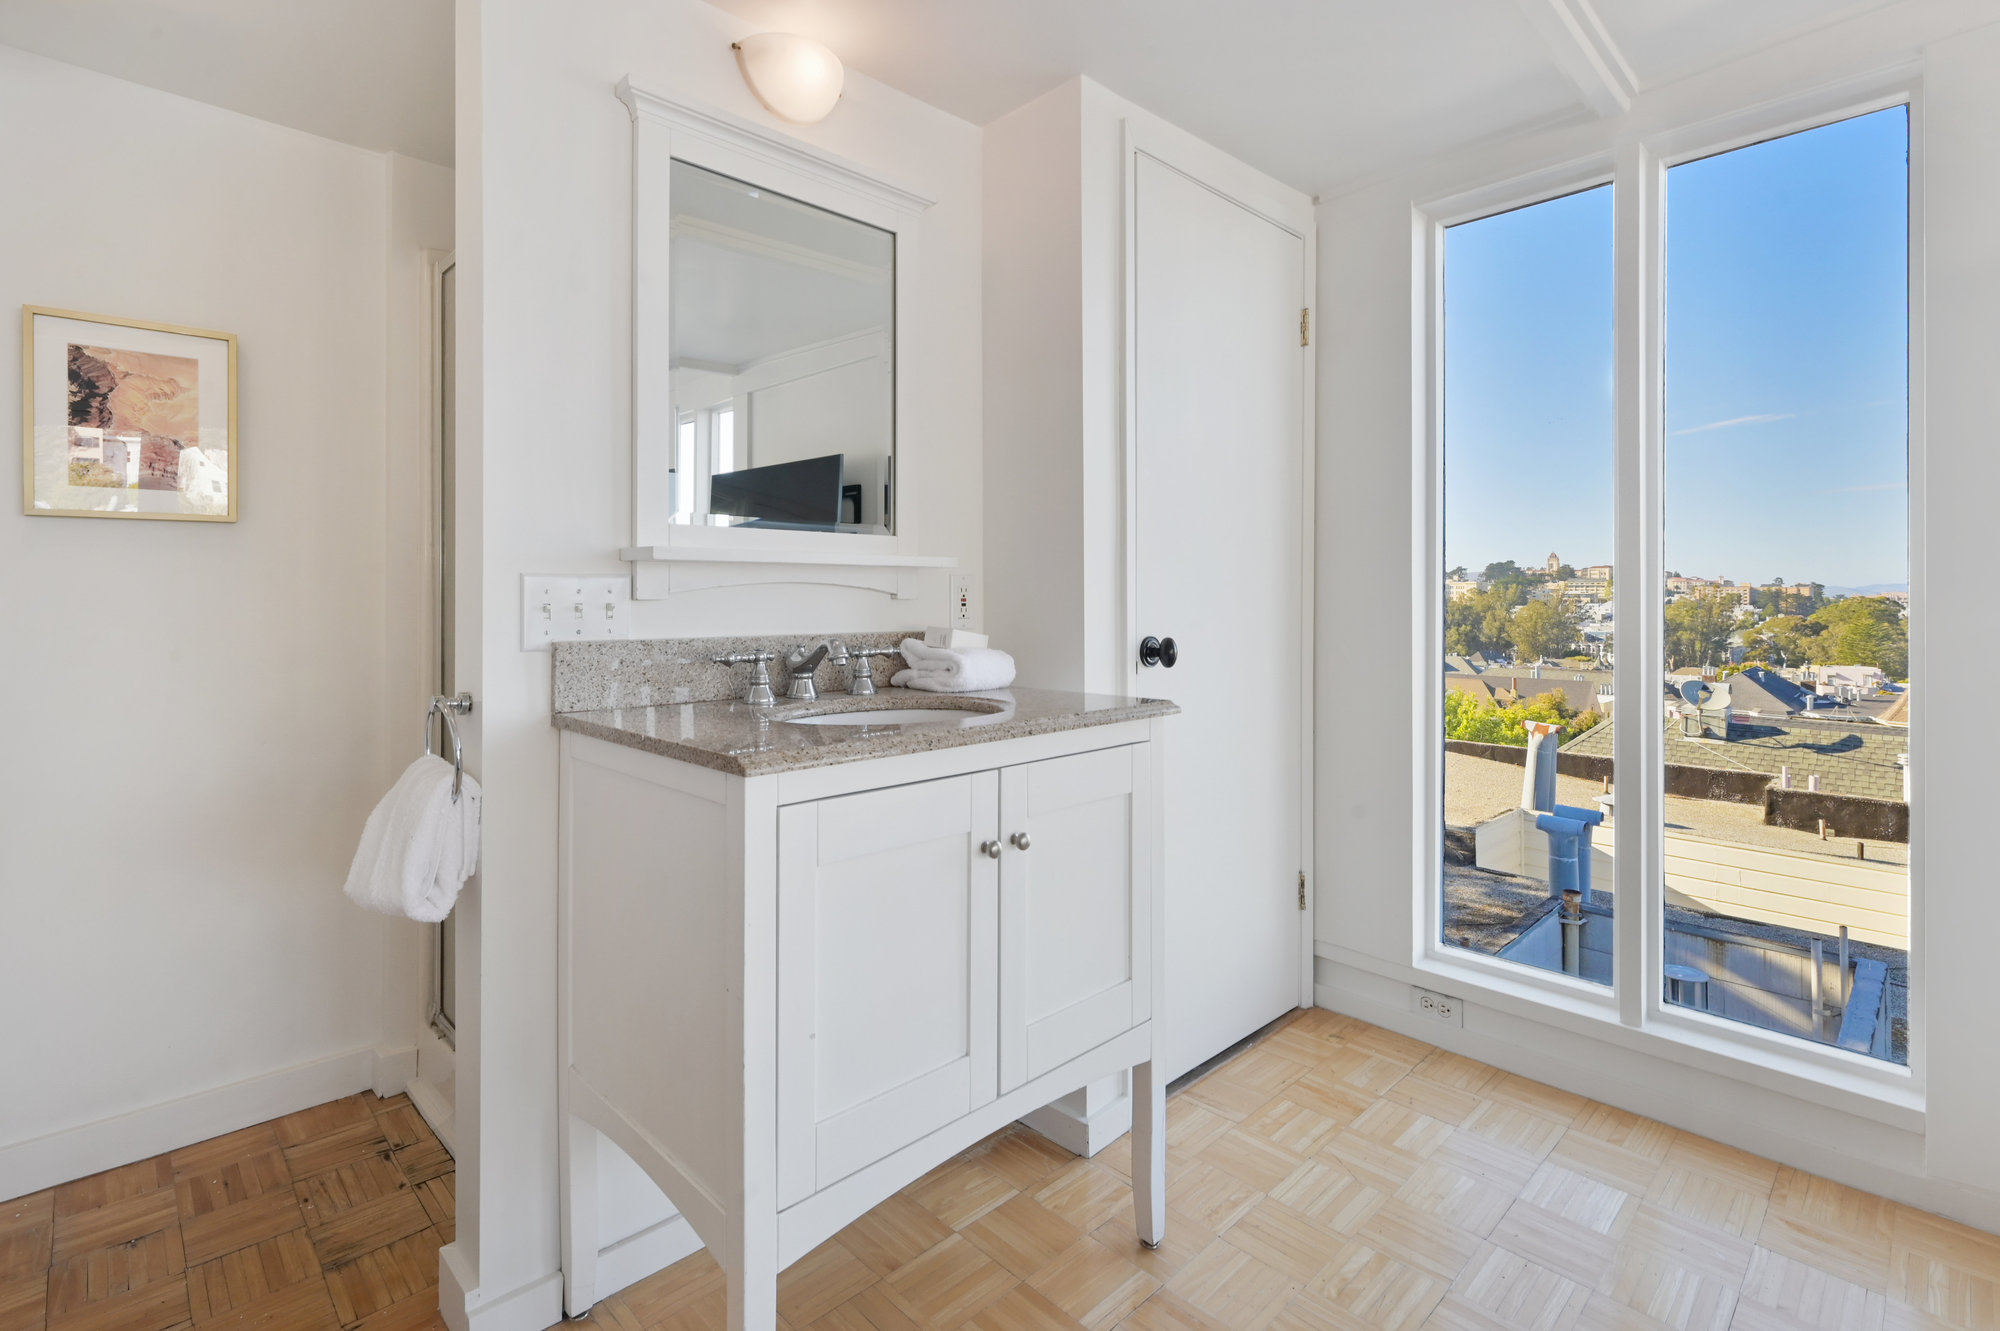 Property Photo: Close-up of the sink and vanity, with a partial view of the city in the background